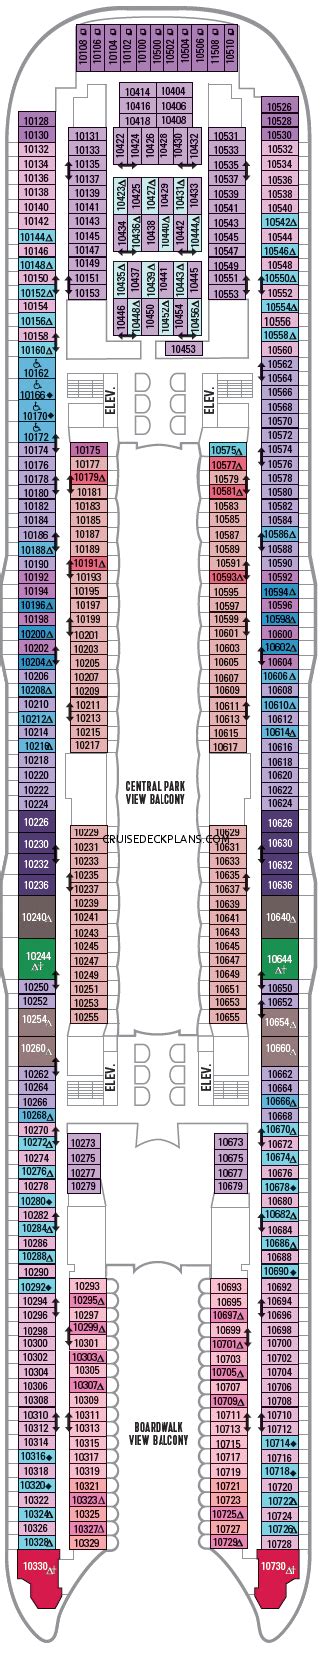 %s deck plan find your cabin here on the ship and cabin plan overview of inside and balcony cabins ship's plan allure of the seas. Allure of the Seas Boardwalk and Central Park Balcony Details